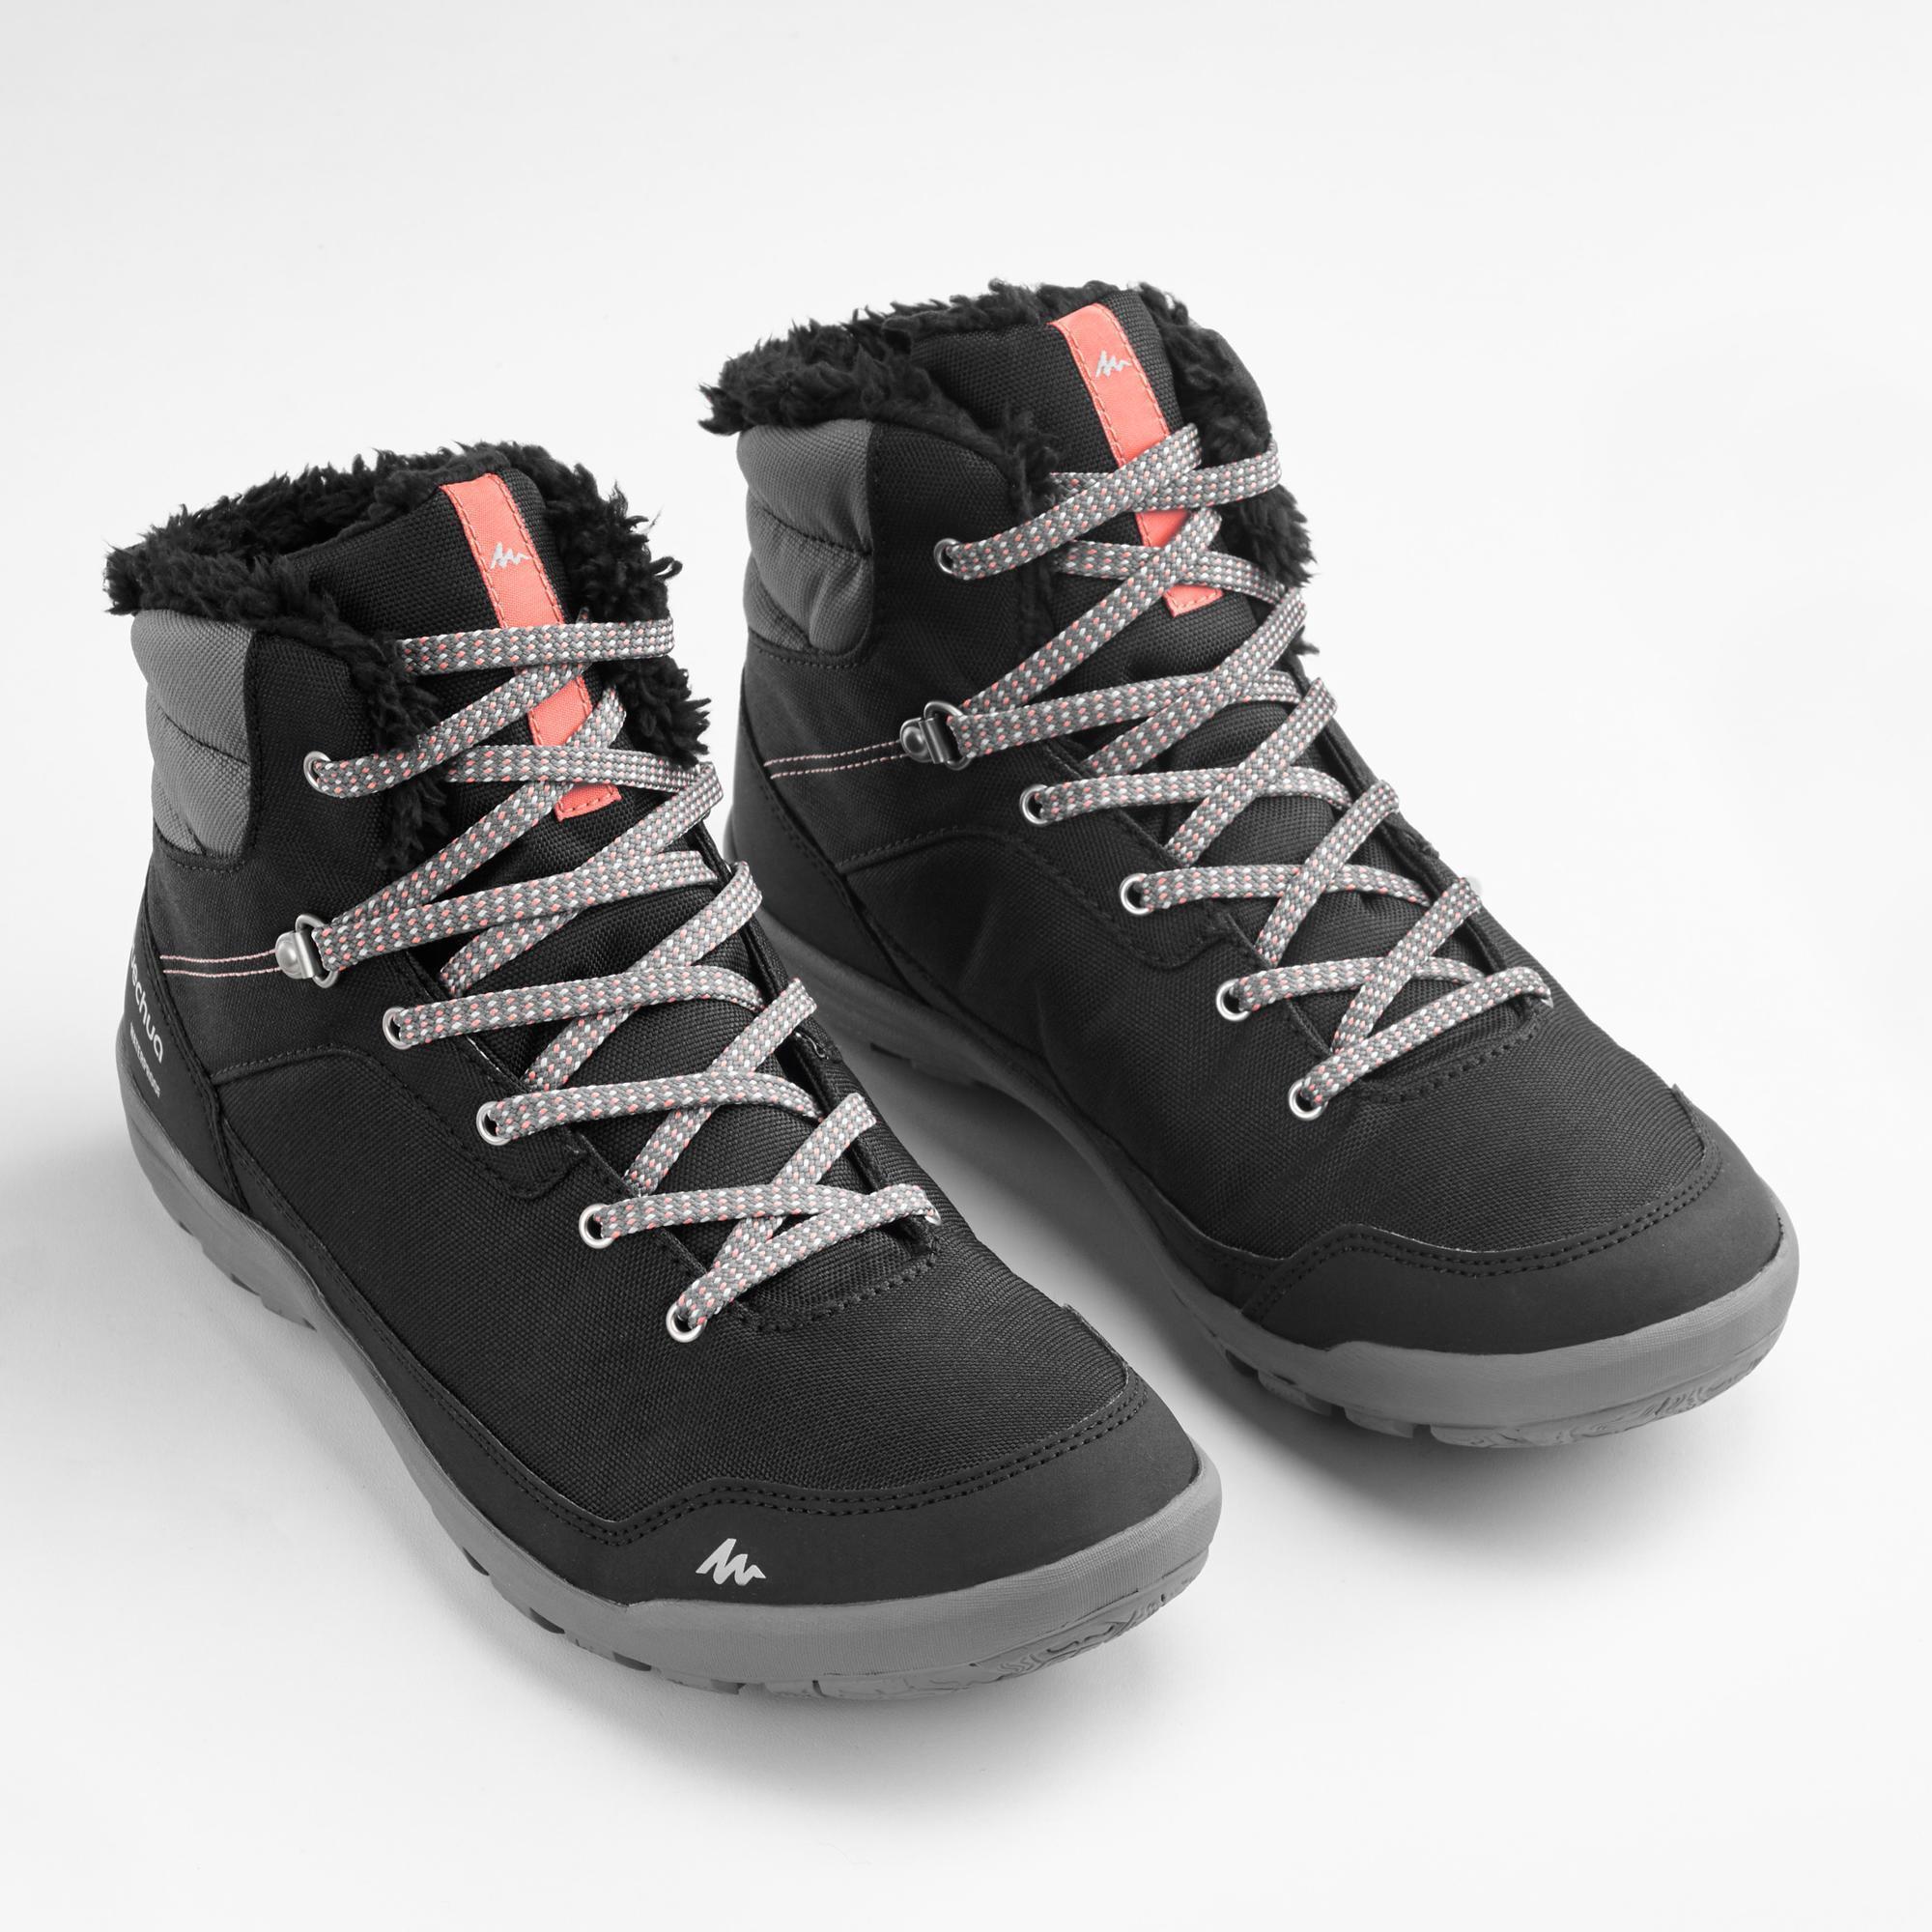 Women’s Warm and Waterproof Hiking Boots - SH100 MID 2/7